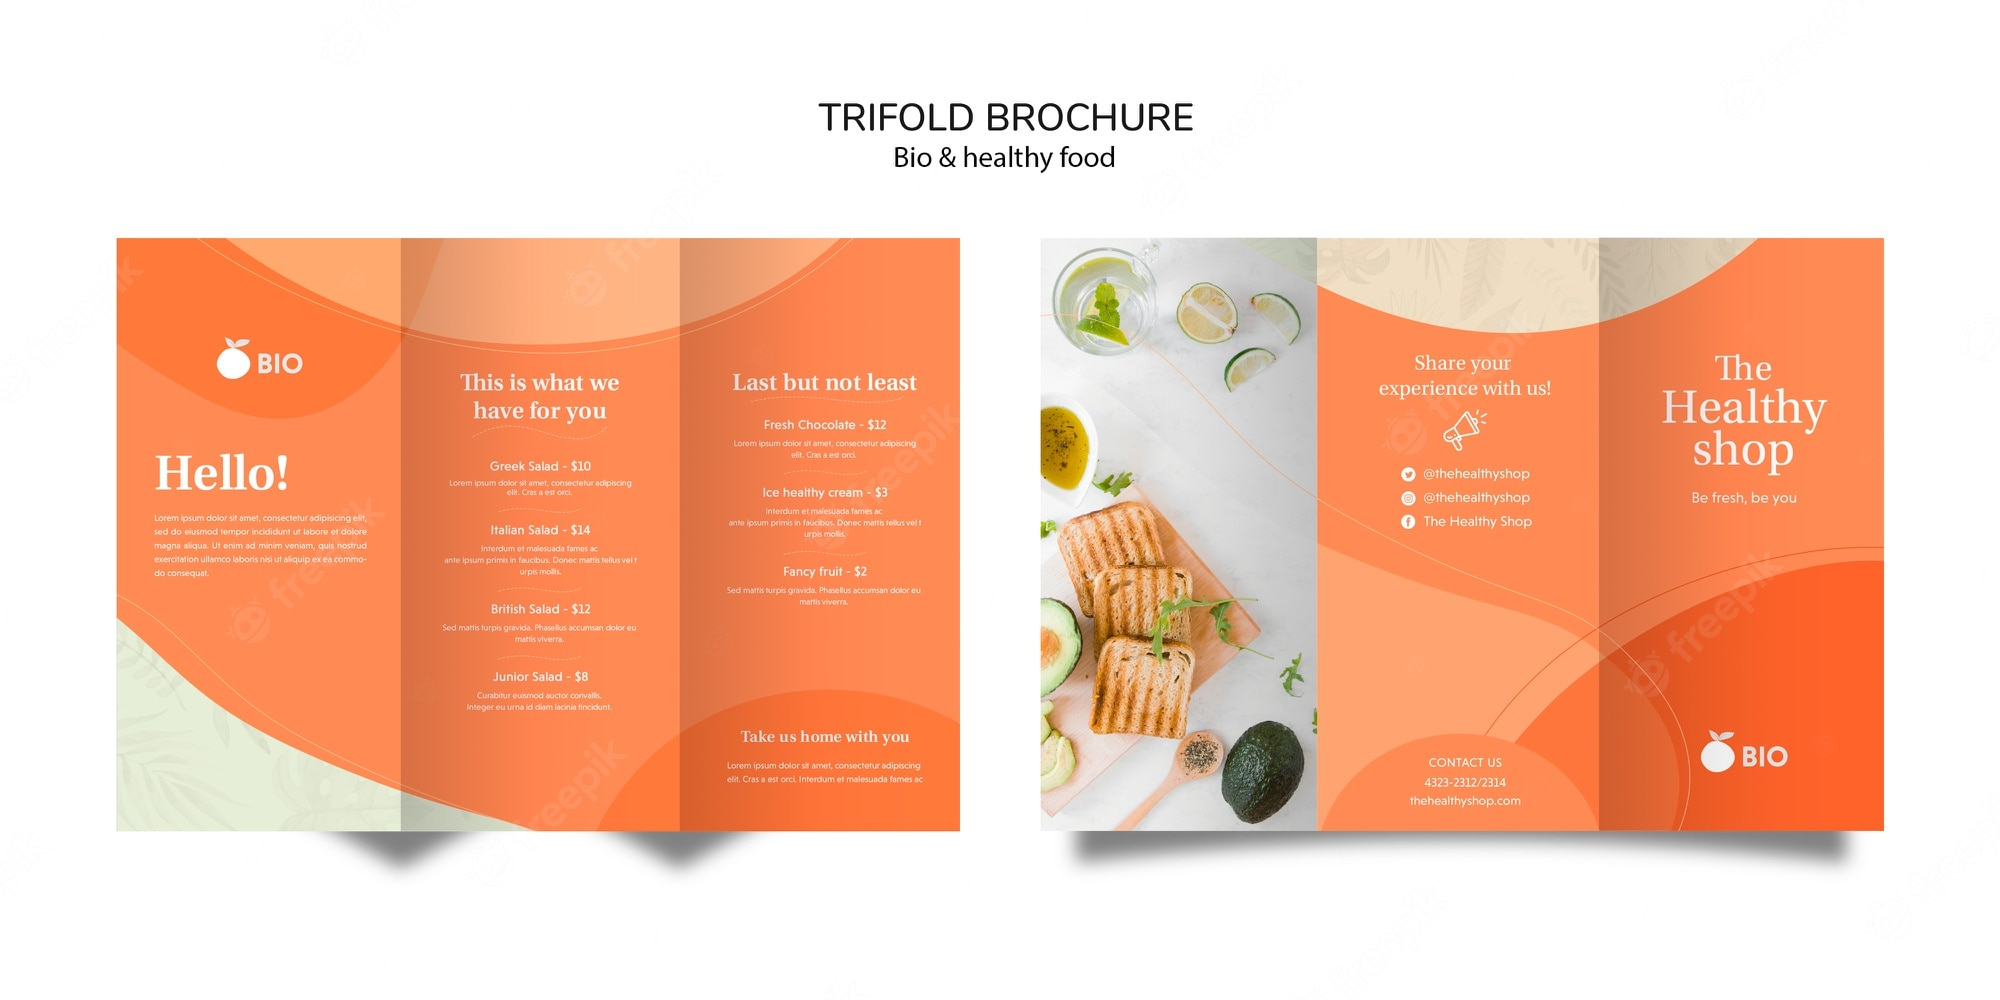 Sale brochure Images  Free Vectors, Stock Photos & PSD Intended For Fancy Brochure Templates